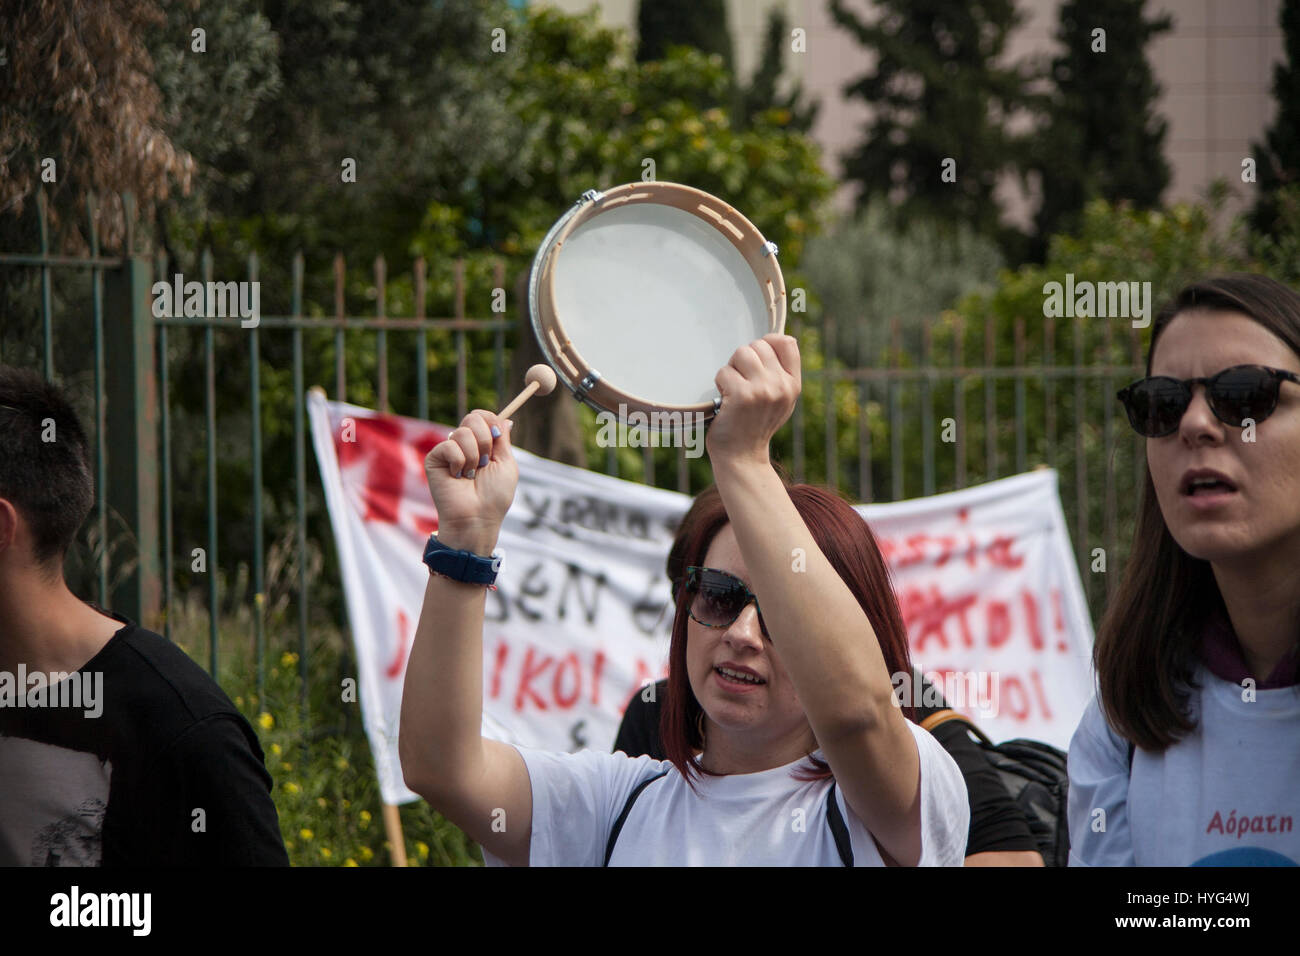 Athens, Greece. 04th Apr, 2017. Special Education Teachers demonstrate in front of the Ministry of Education in Athens demanding more funds for special education and no more austerity. Credit: George Panagakis/Pacific Press/Alamy Live News Stock Photo